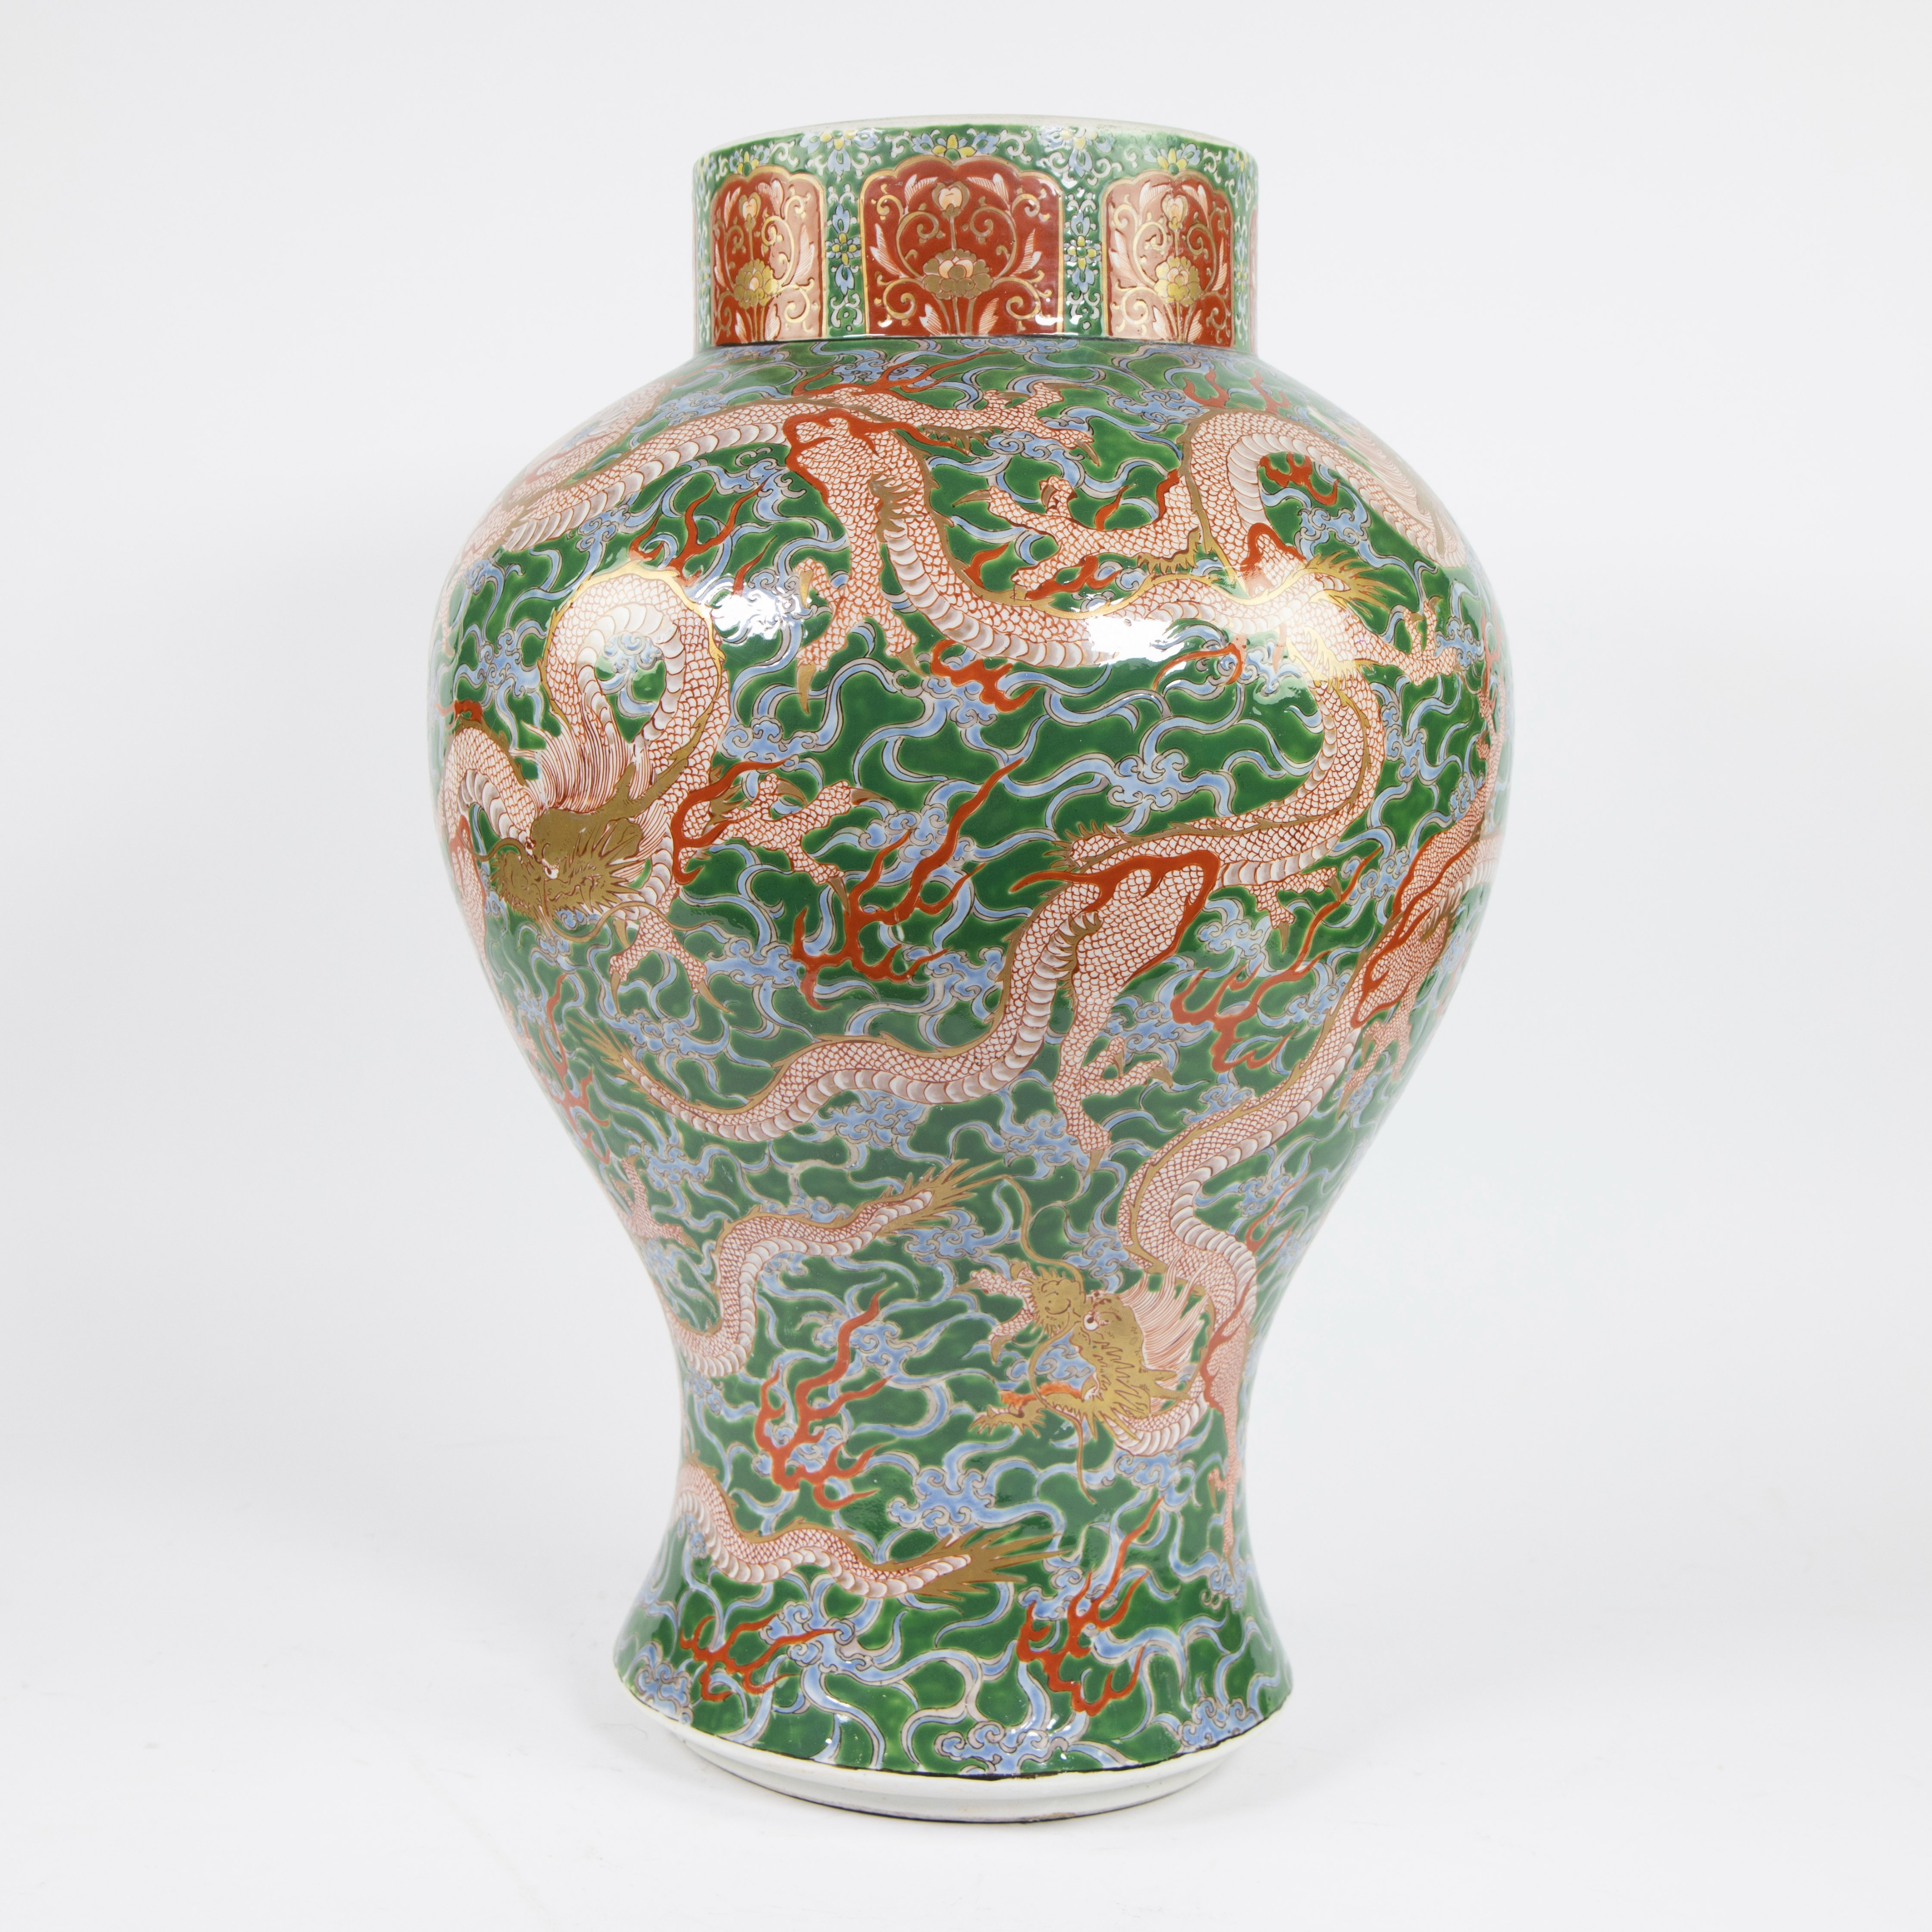 Chinese/Japanese vase marked Chenghua, Guangxu period, late 19th century - Image 4 of 6